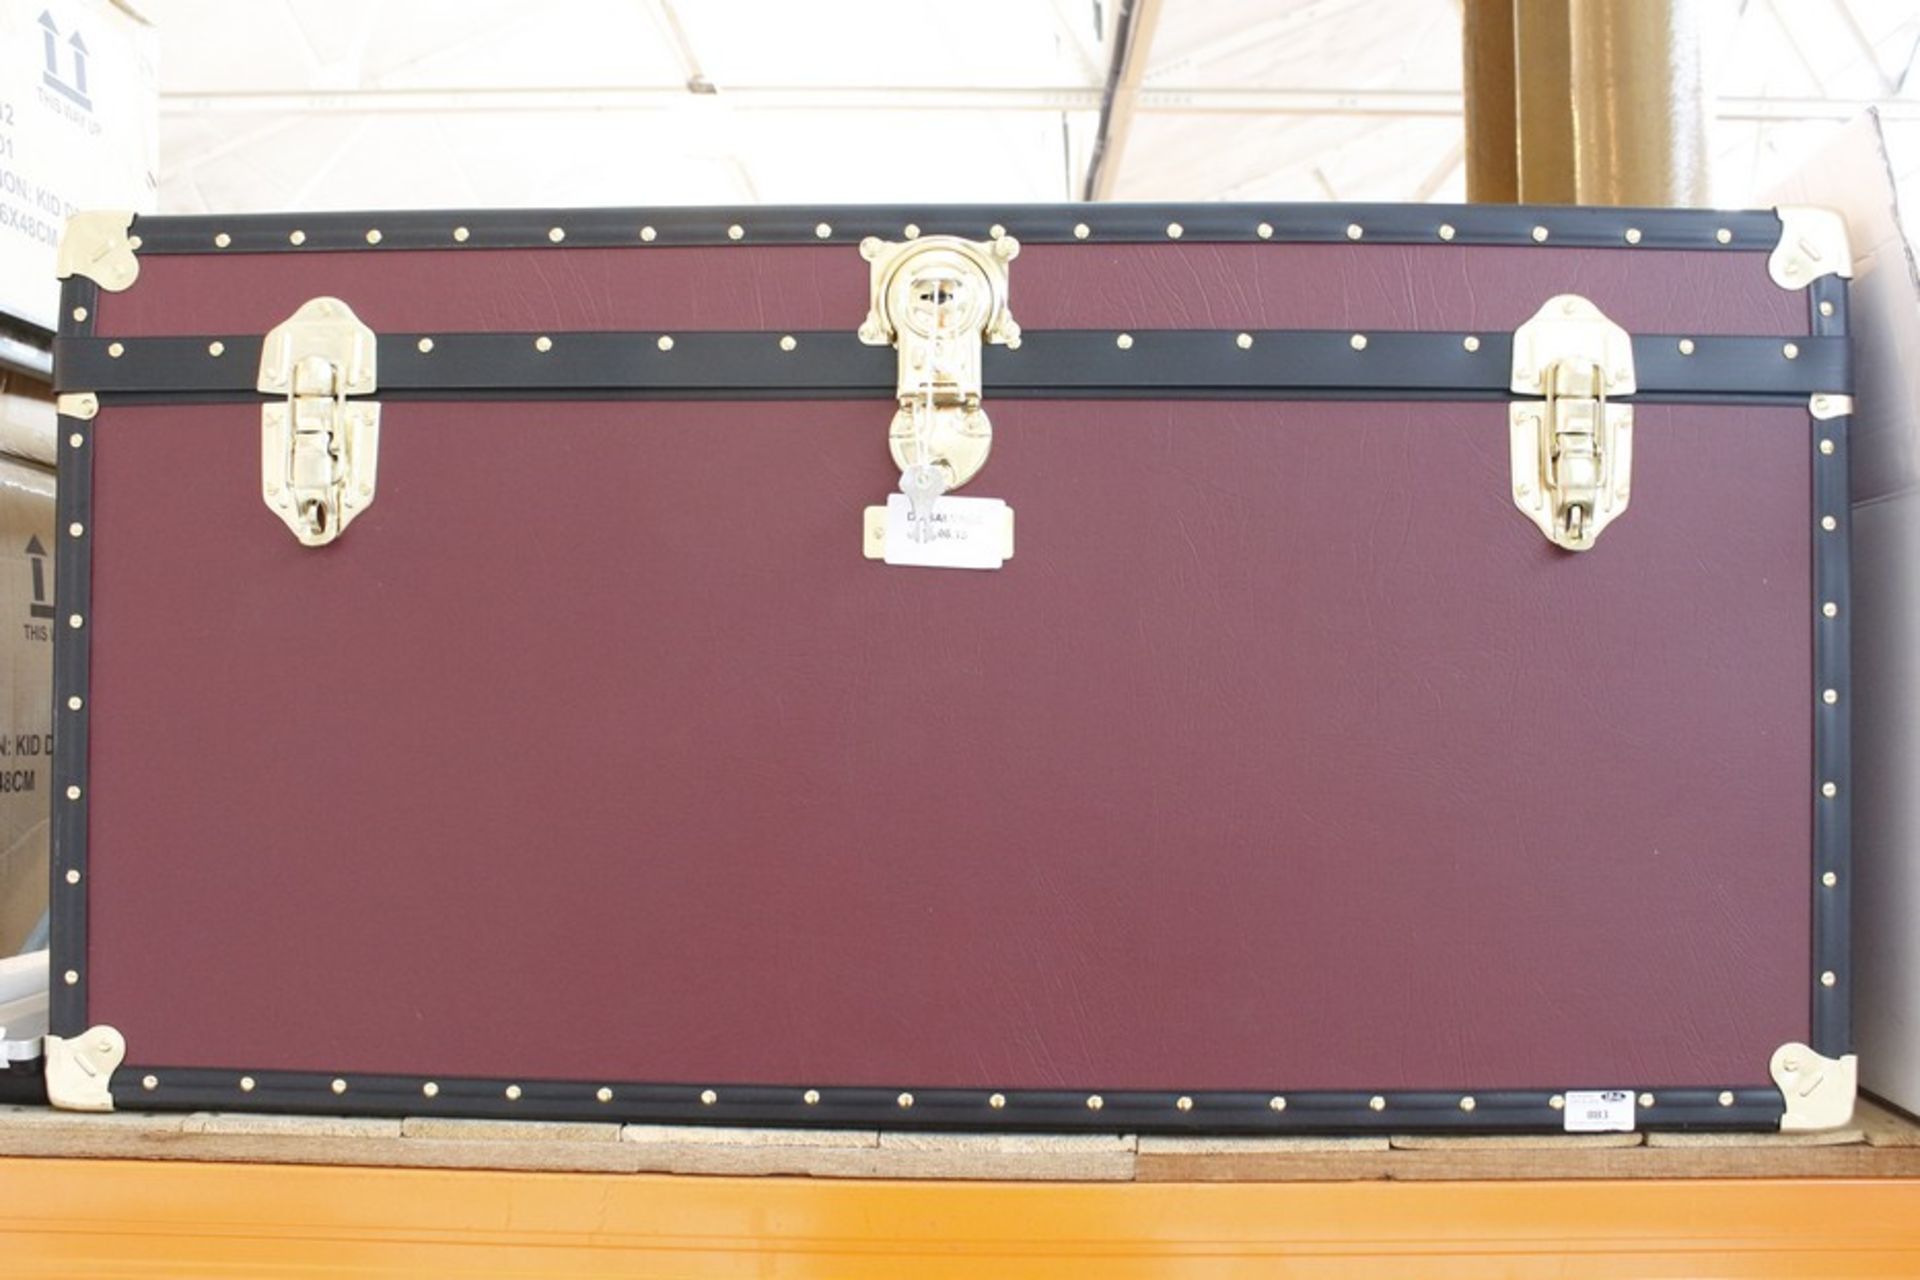 1 x DESIGNER STORAGE TRUNK WITH KEYS (19.6.15)  *PLEASE NOTE THAT THE BID PRICE IS MULTIPLIED BY THE